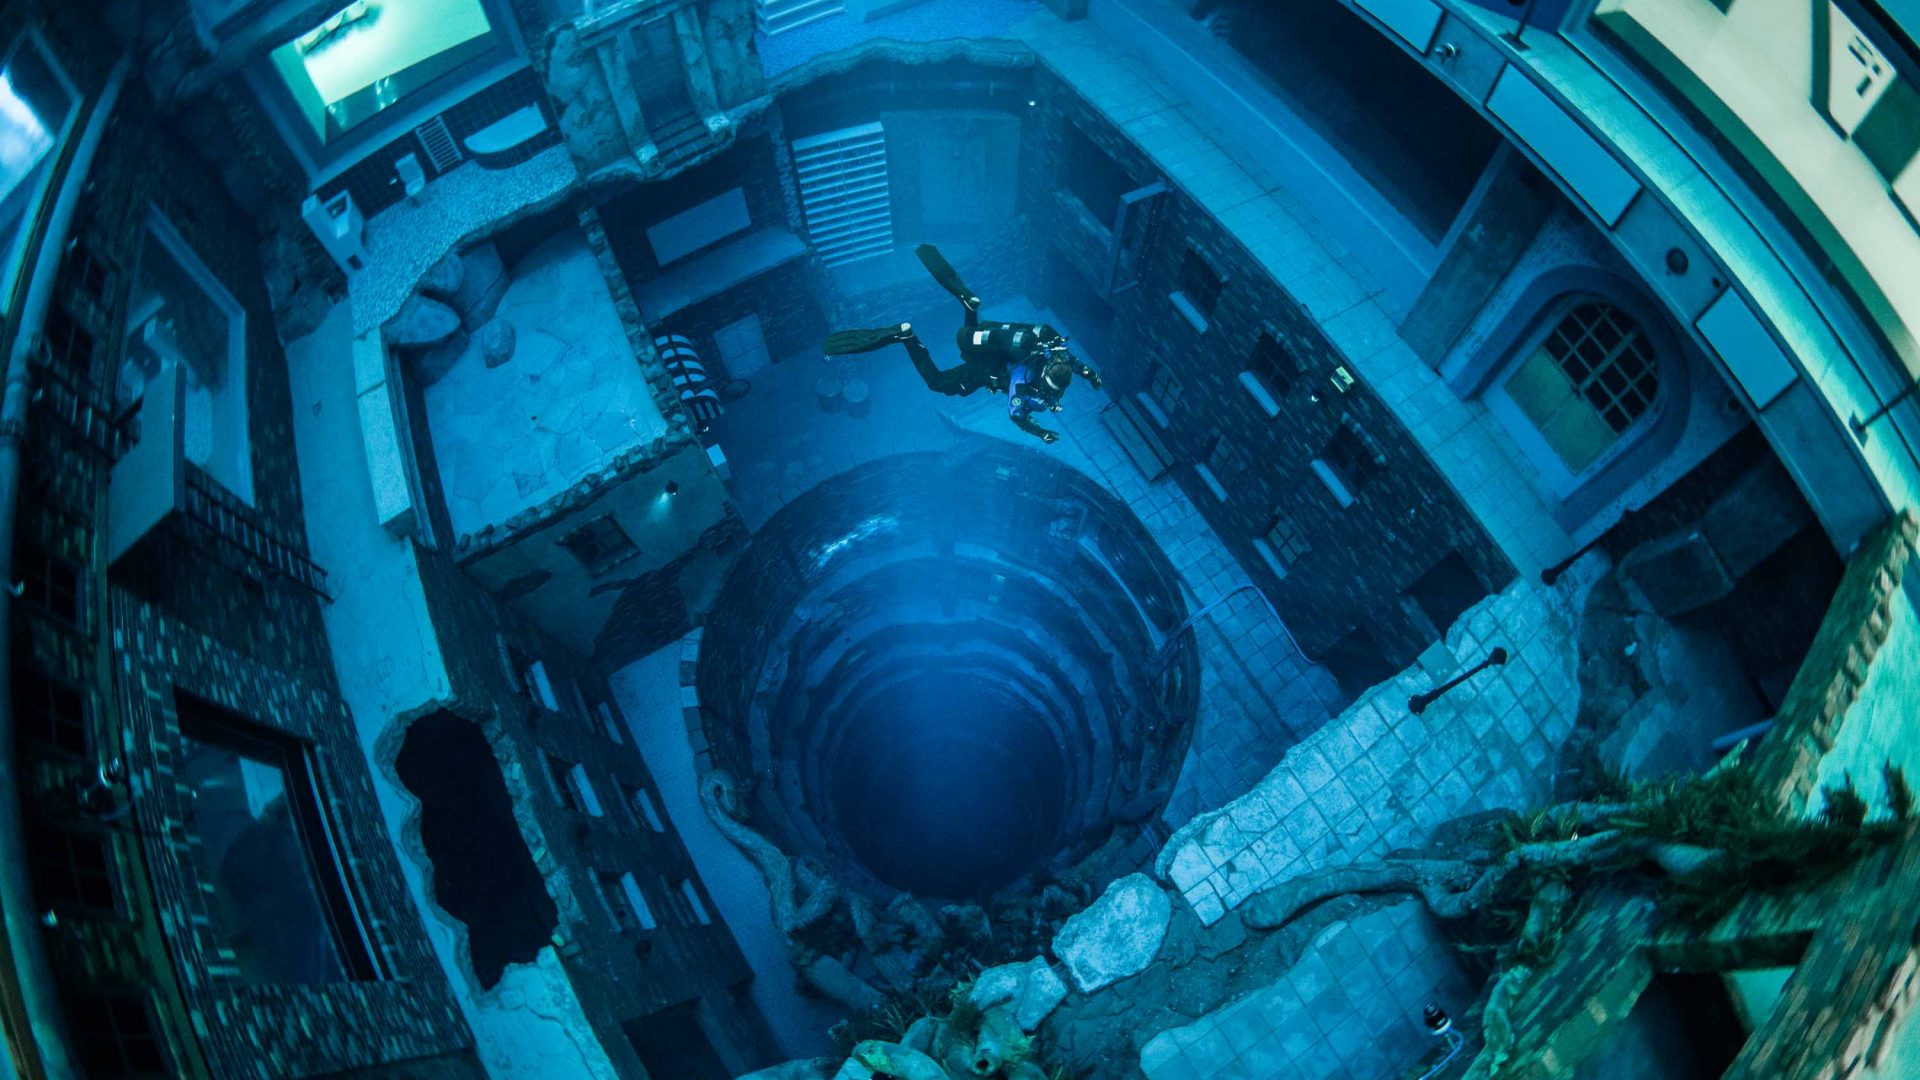 Looking down into the depths of the underwater structures.